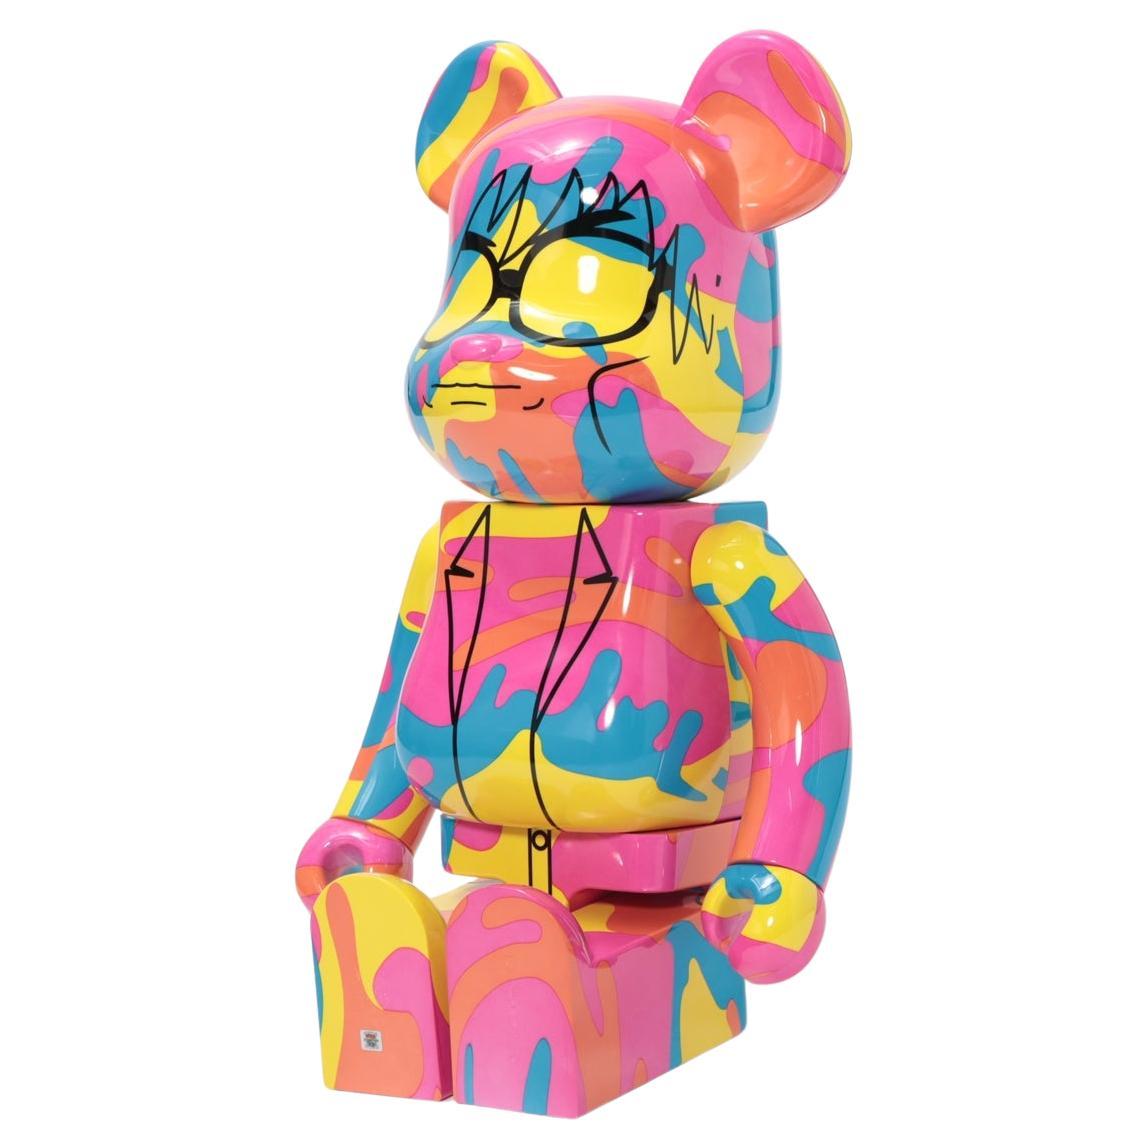 Bearbrick Andy Warhol Special Multicolor 1000% For Sale